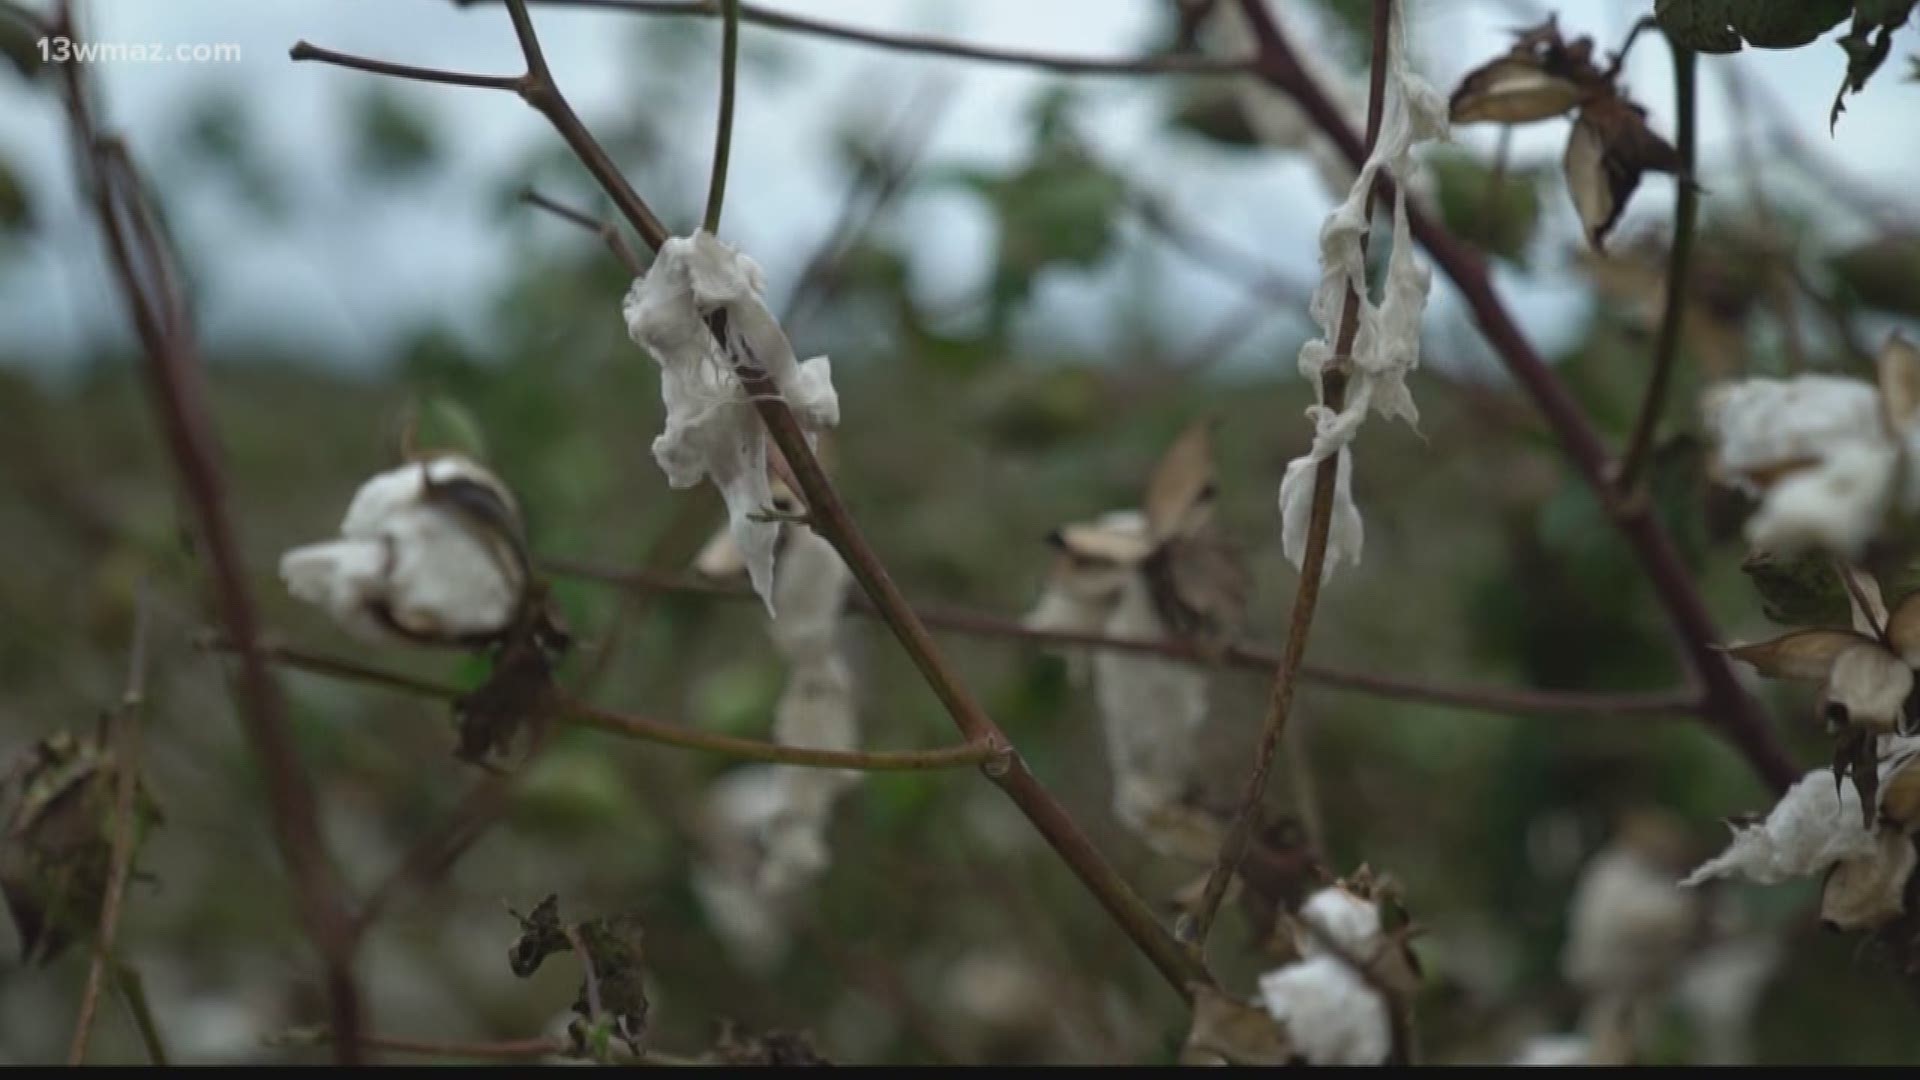 Cotton farmers asking for federal help